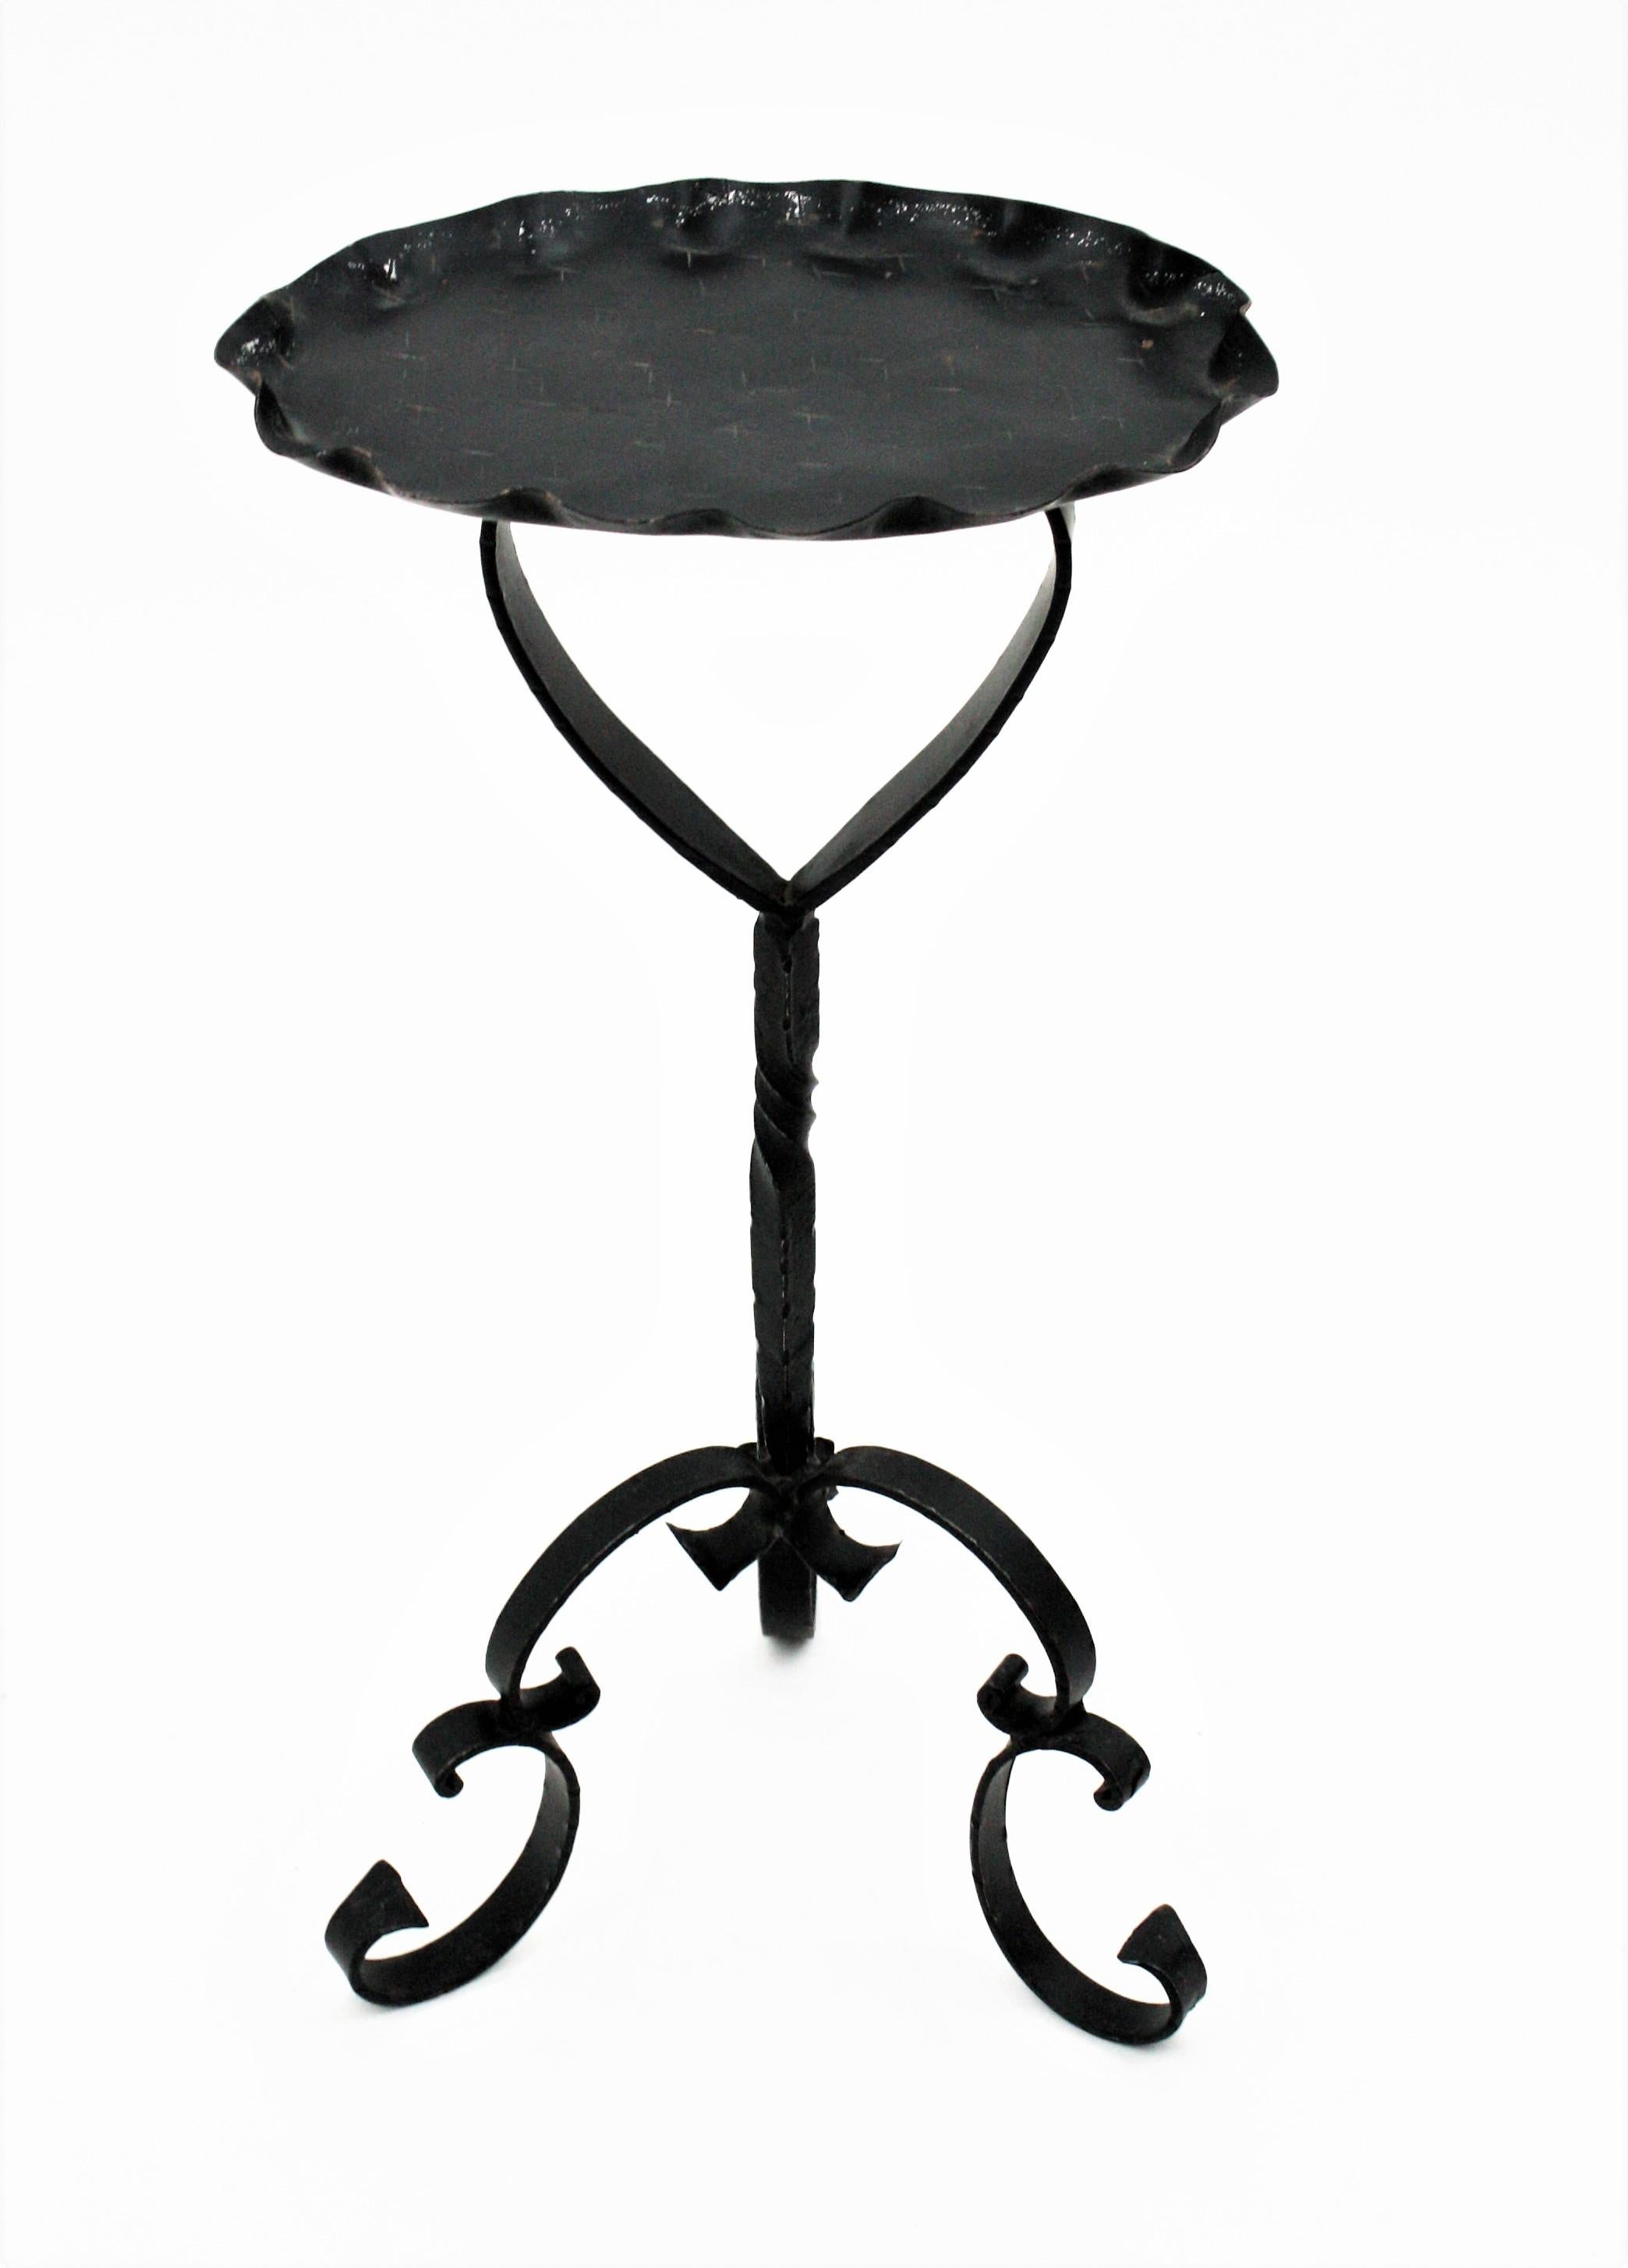 Spanish Drinks Table / Side Table / Oval Martini Table in Wrought Iron For Sale 7